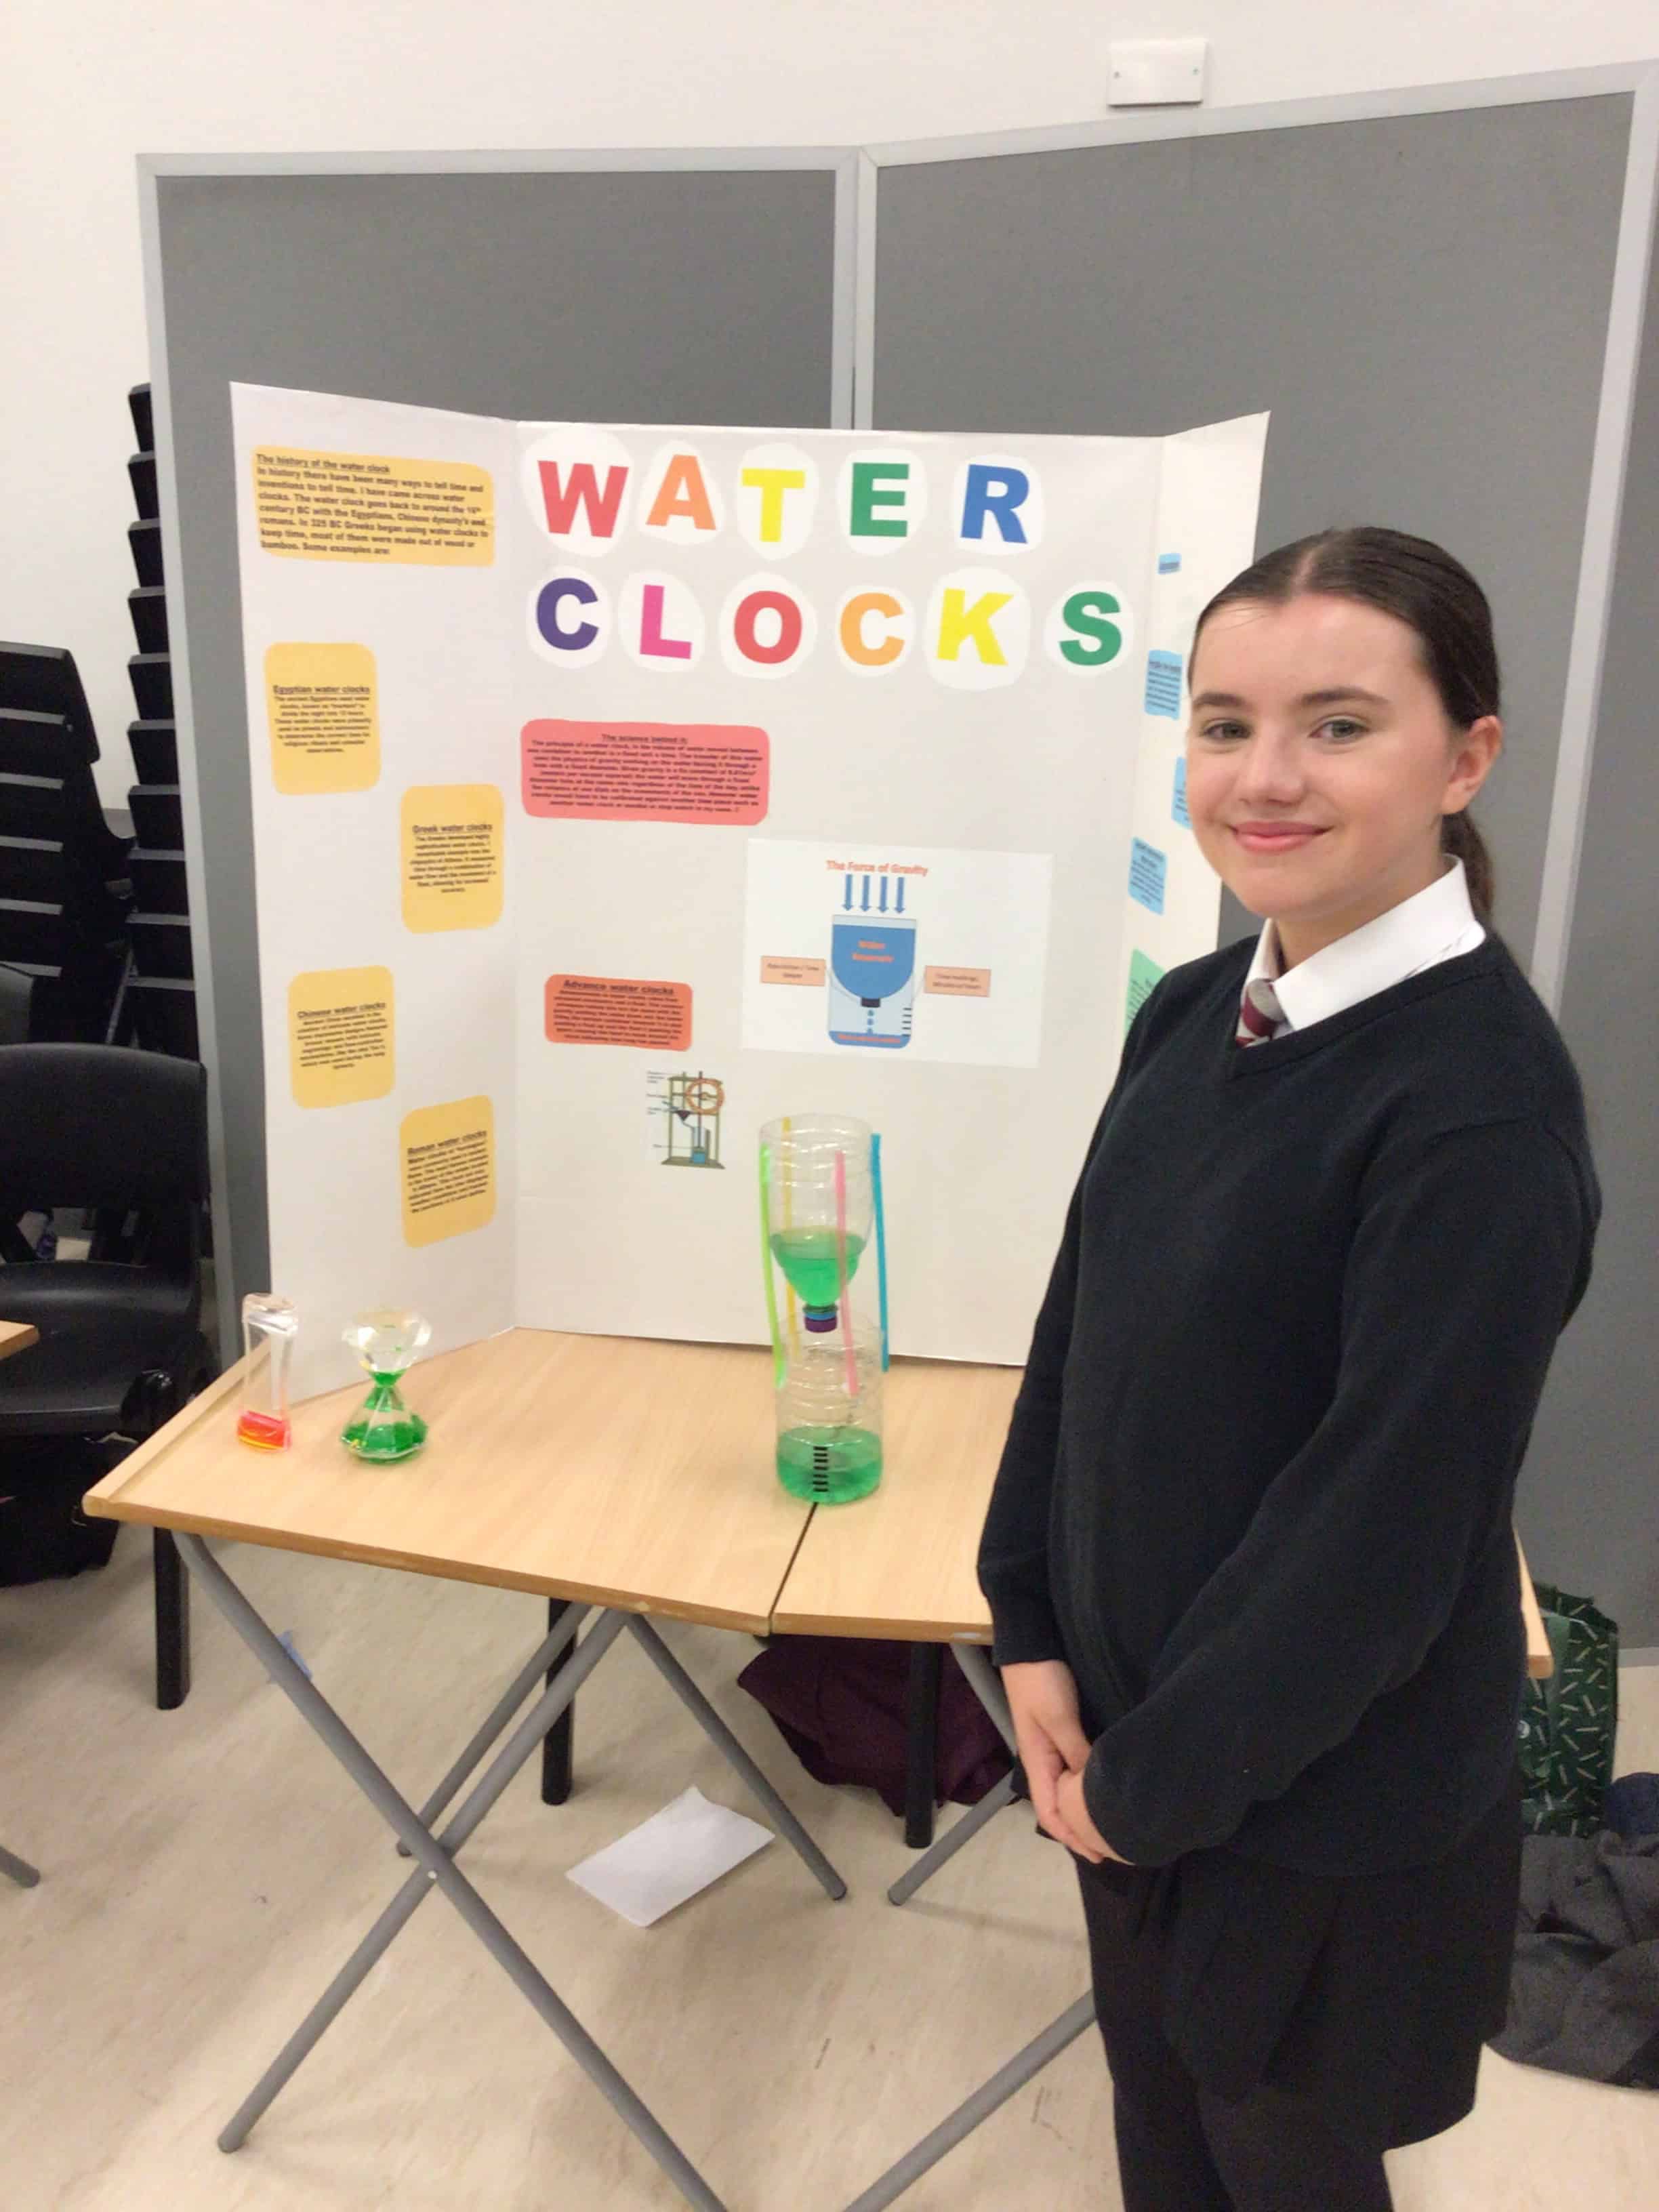 Emilia, Hazel Grove High School student poses with her Science project on Water Clocks.